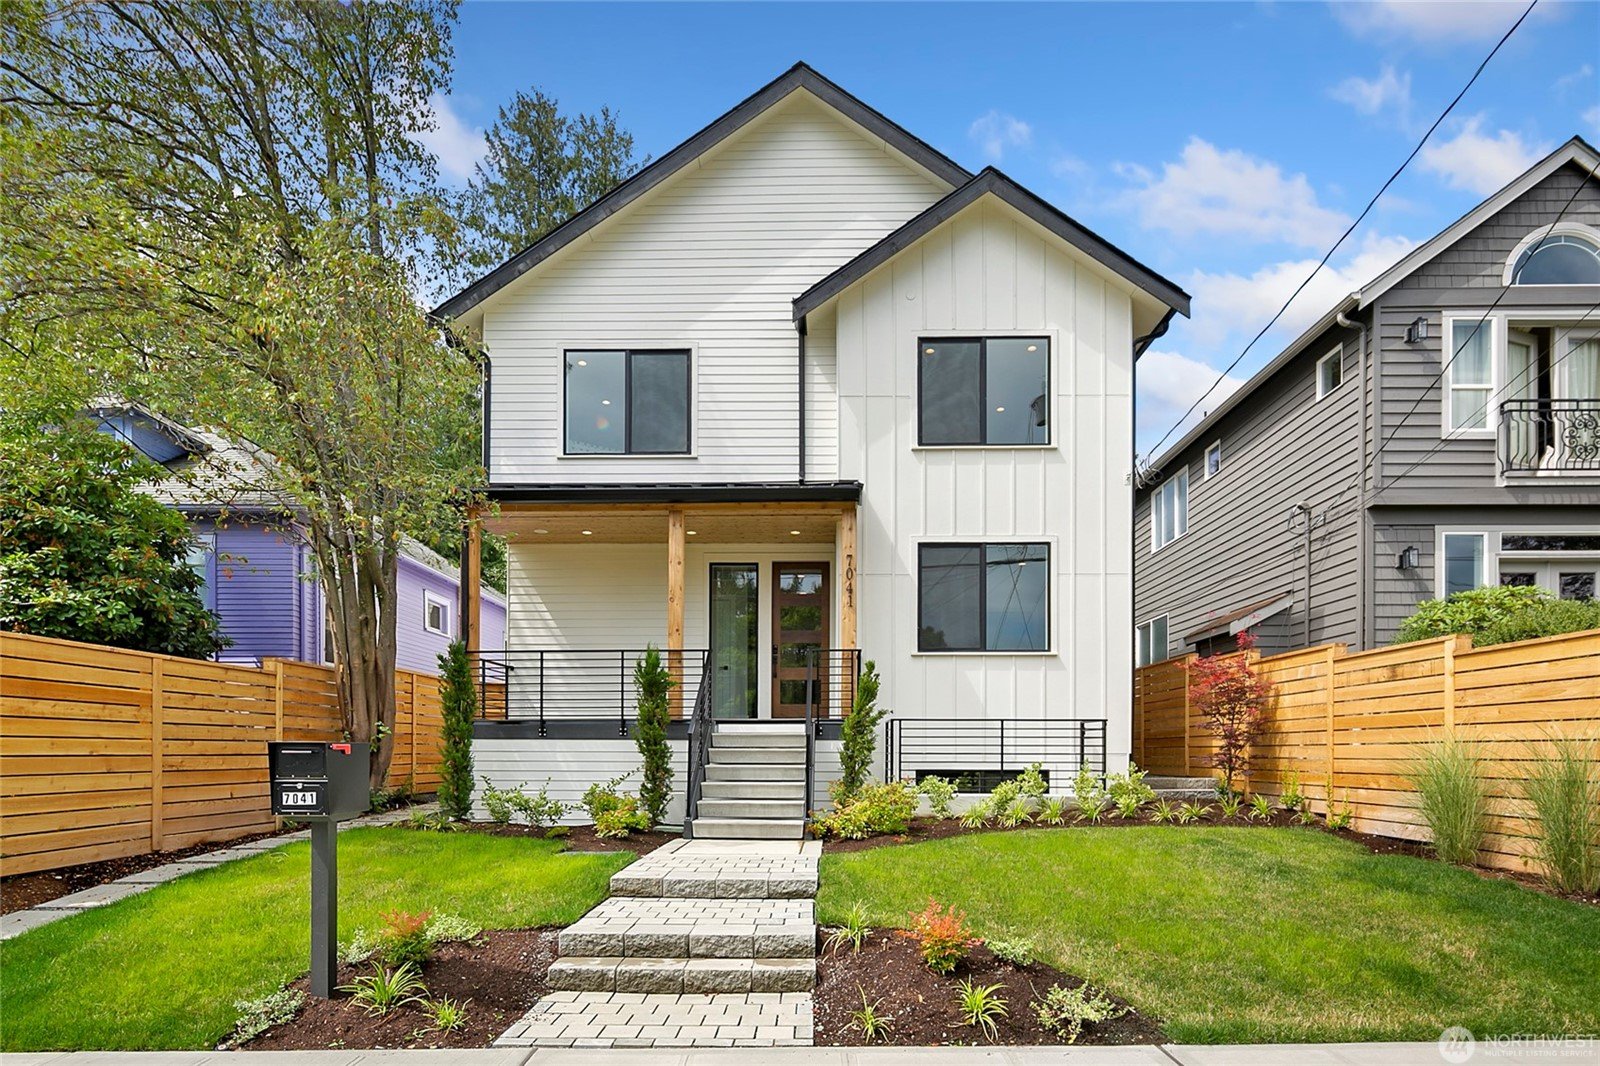 Beautiful 2023 home in the Bryant Neighborhood of Seattle